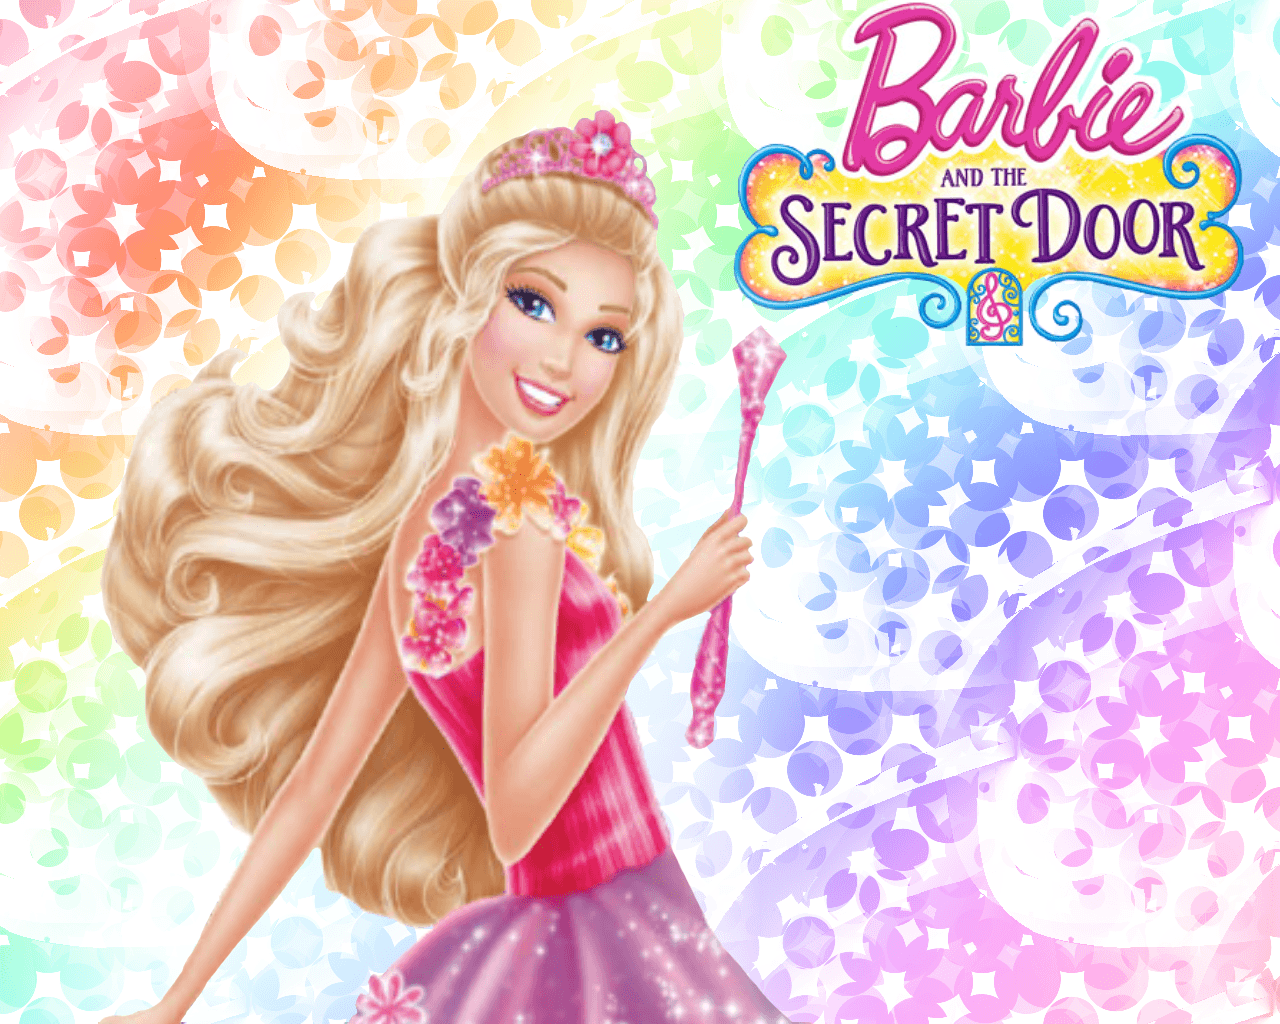 Barbie Movies Wallpaper: Barbie and the Secret Door Wallpaper. Barbie princess, Barbie movies, Barbie